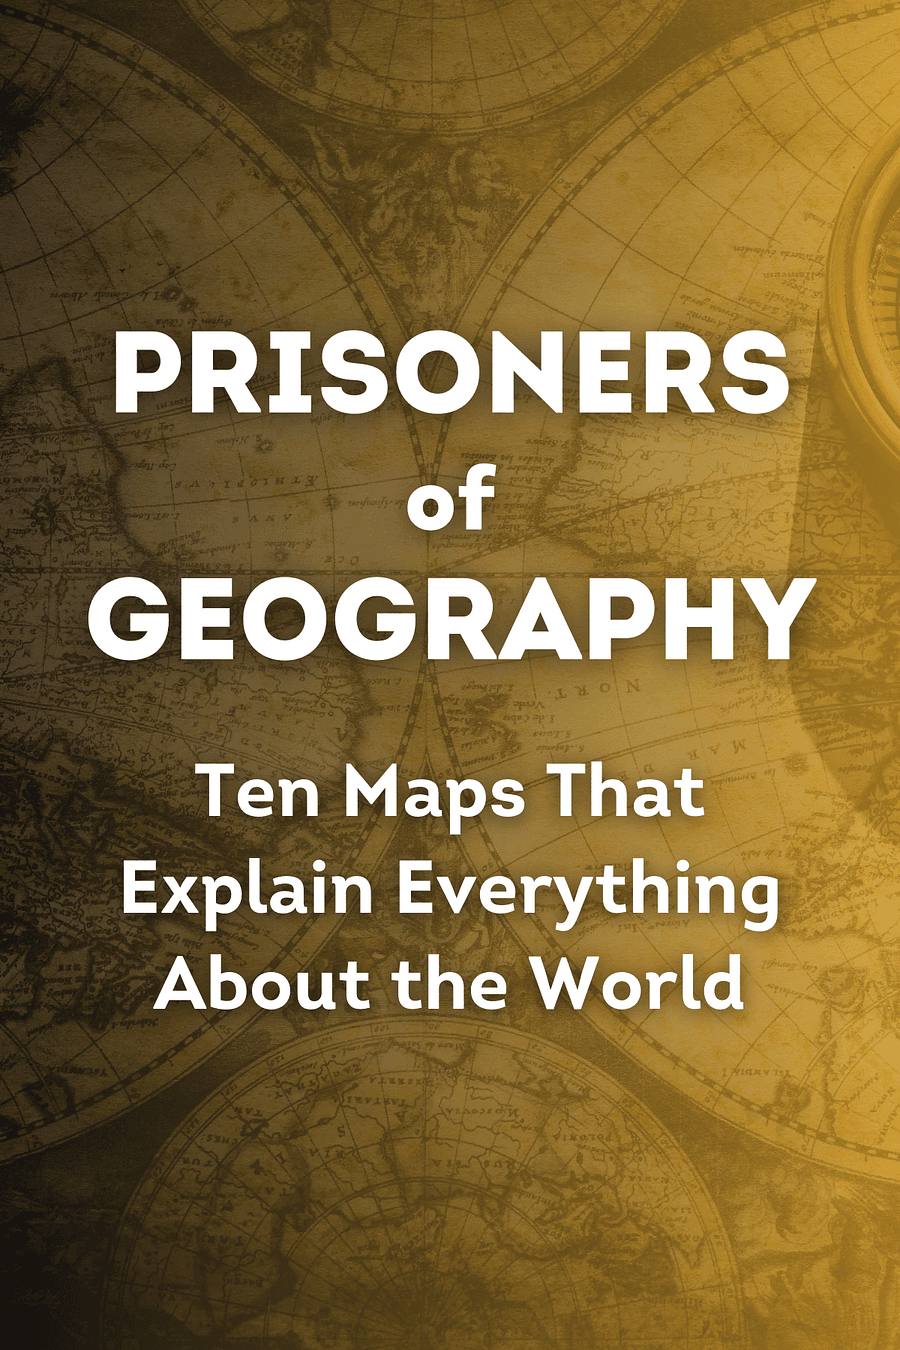 Prisoners of Geography by Tim Marshall - Book Summary